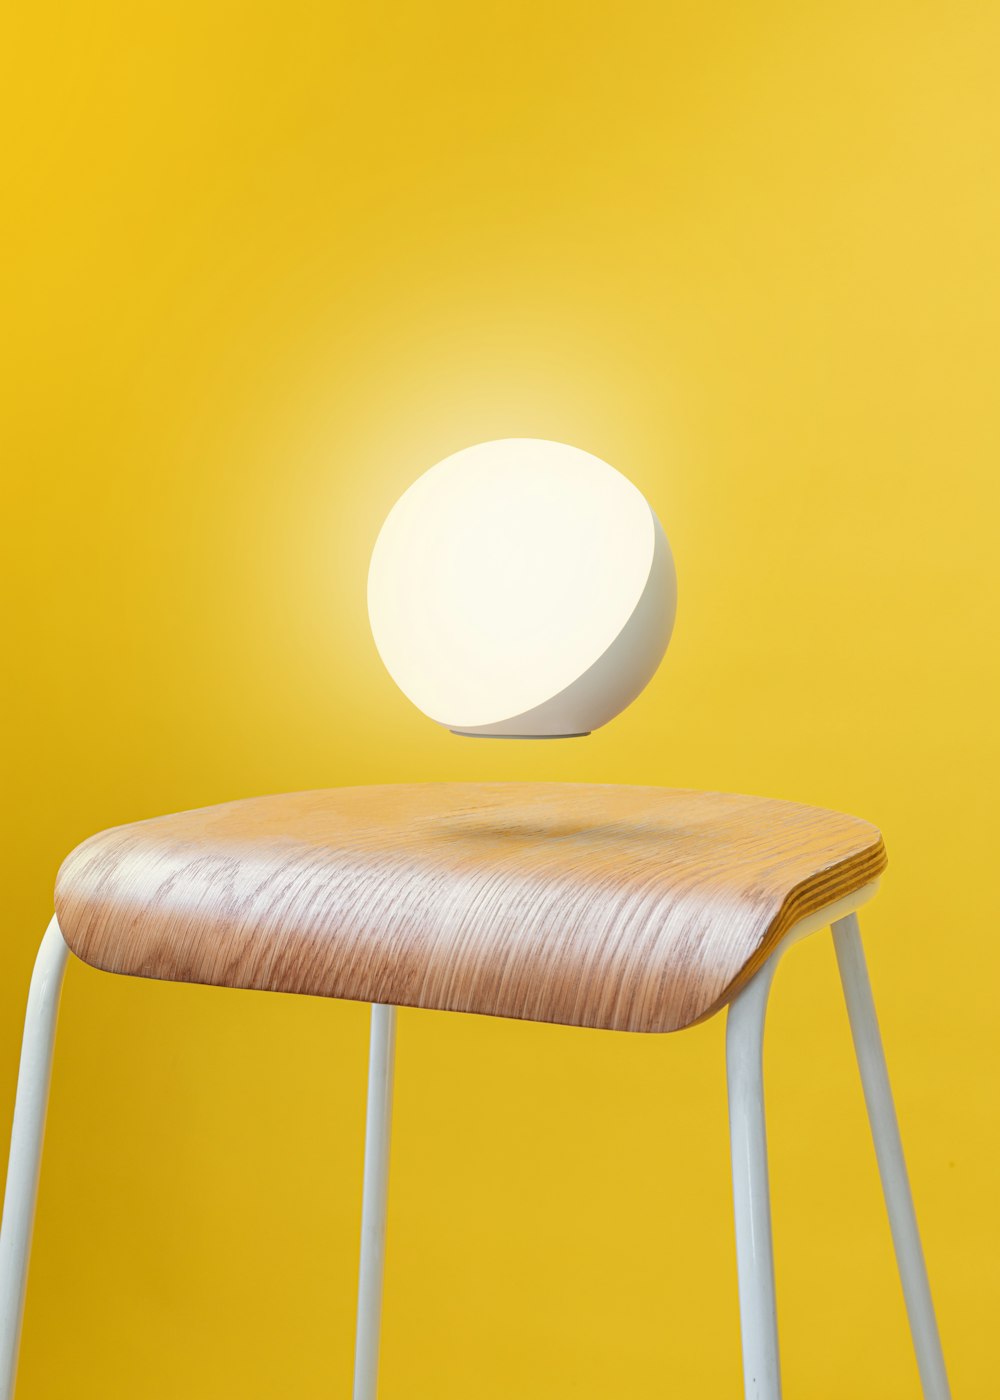 a wooden stool with a light on top of it